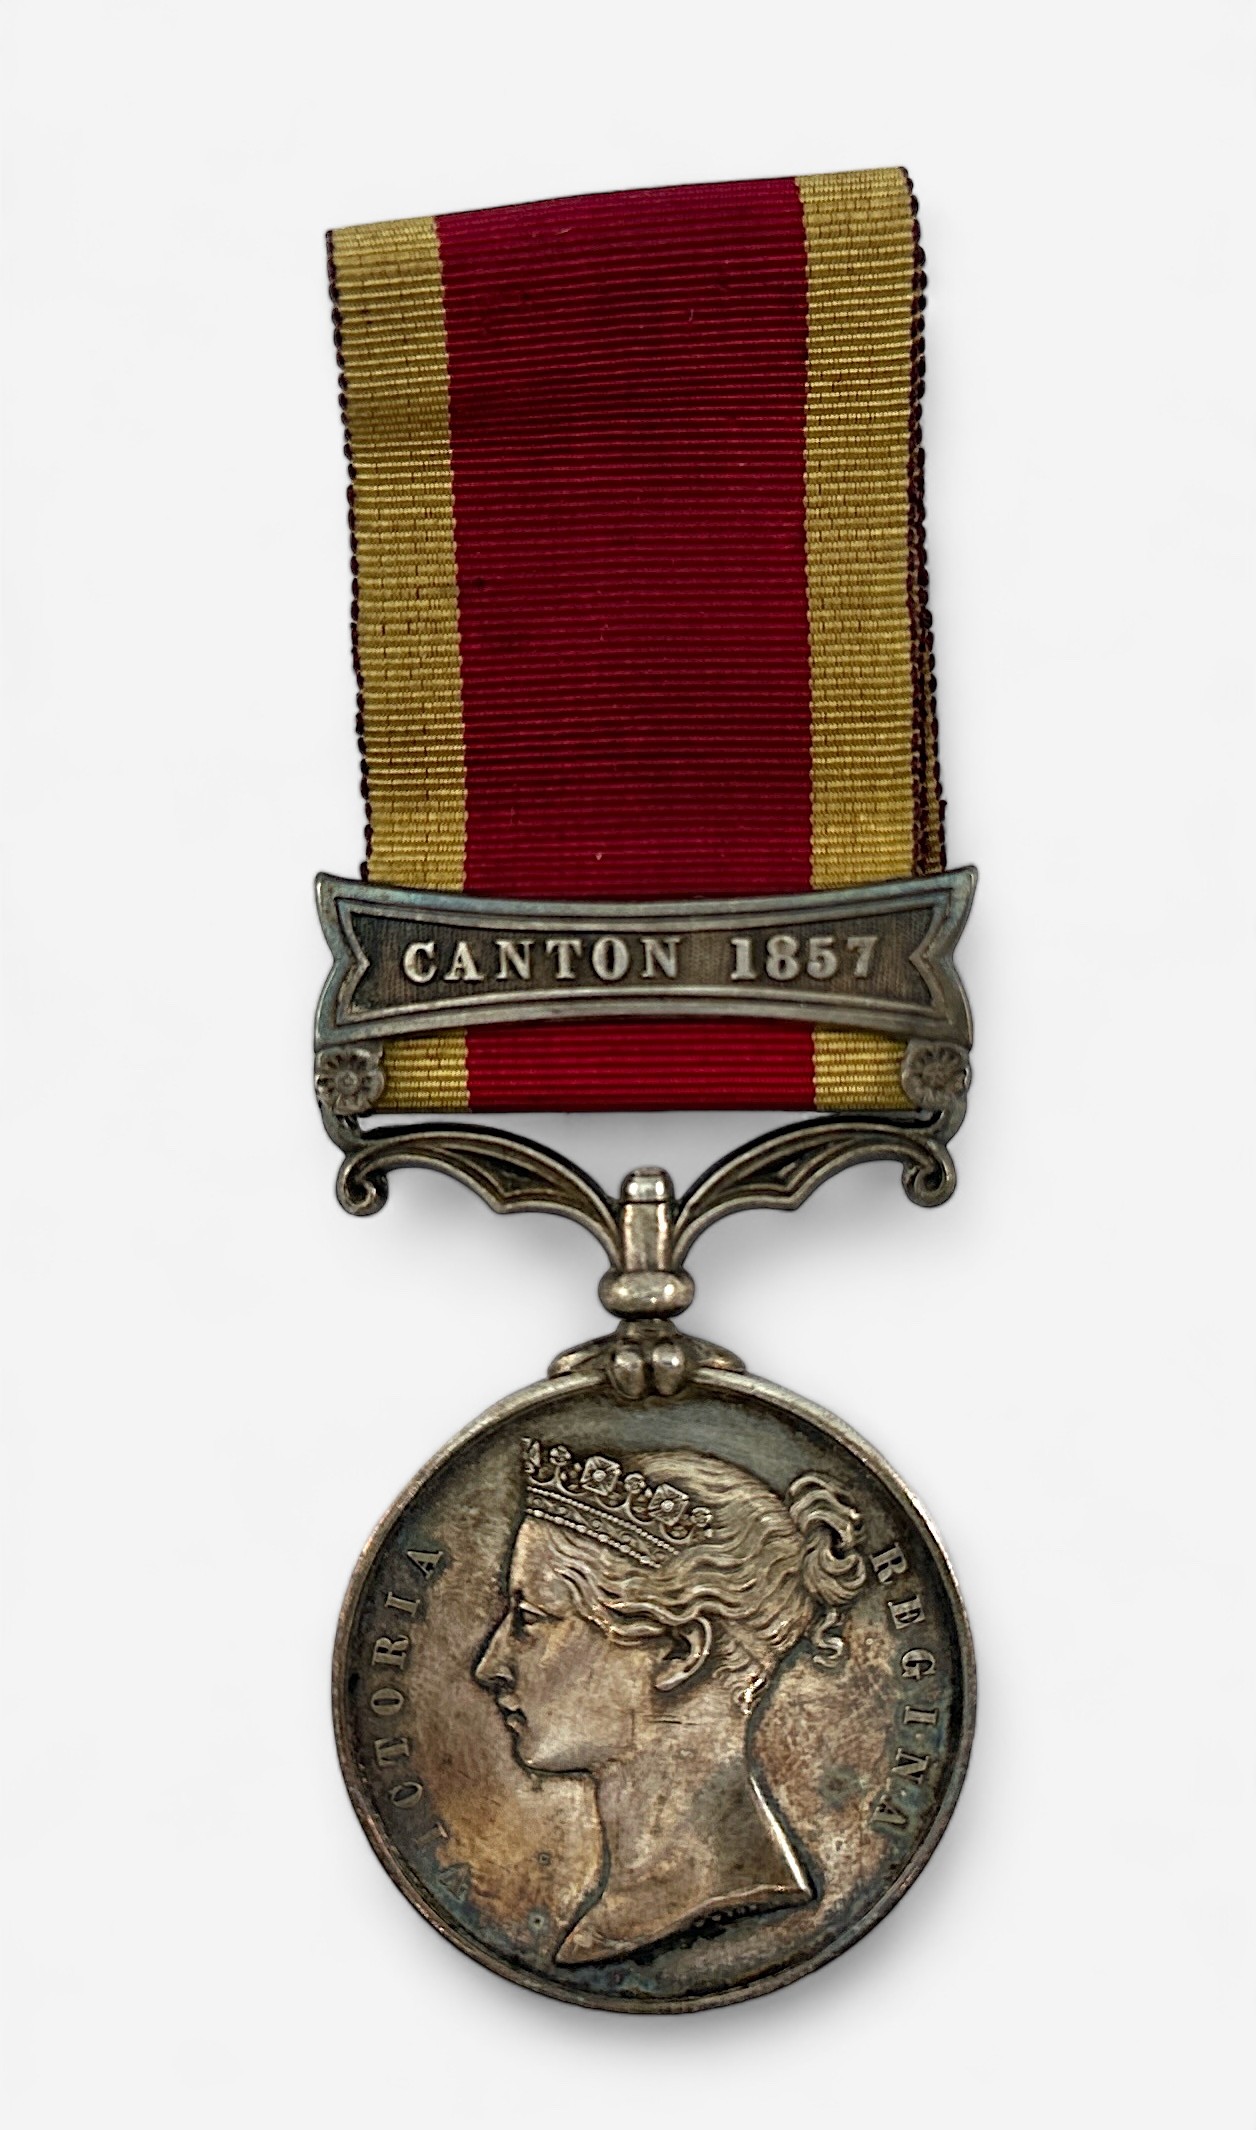 A Second China War Medal with Canton 1857 bar, unnamed.